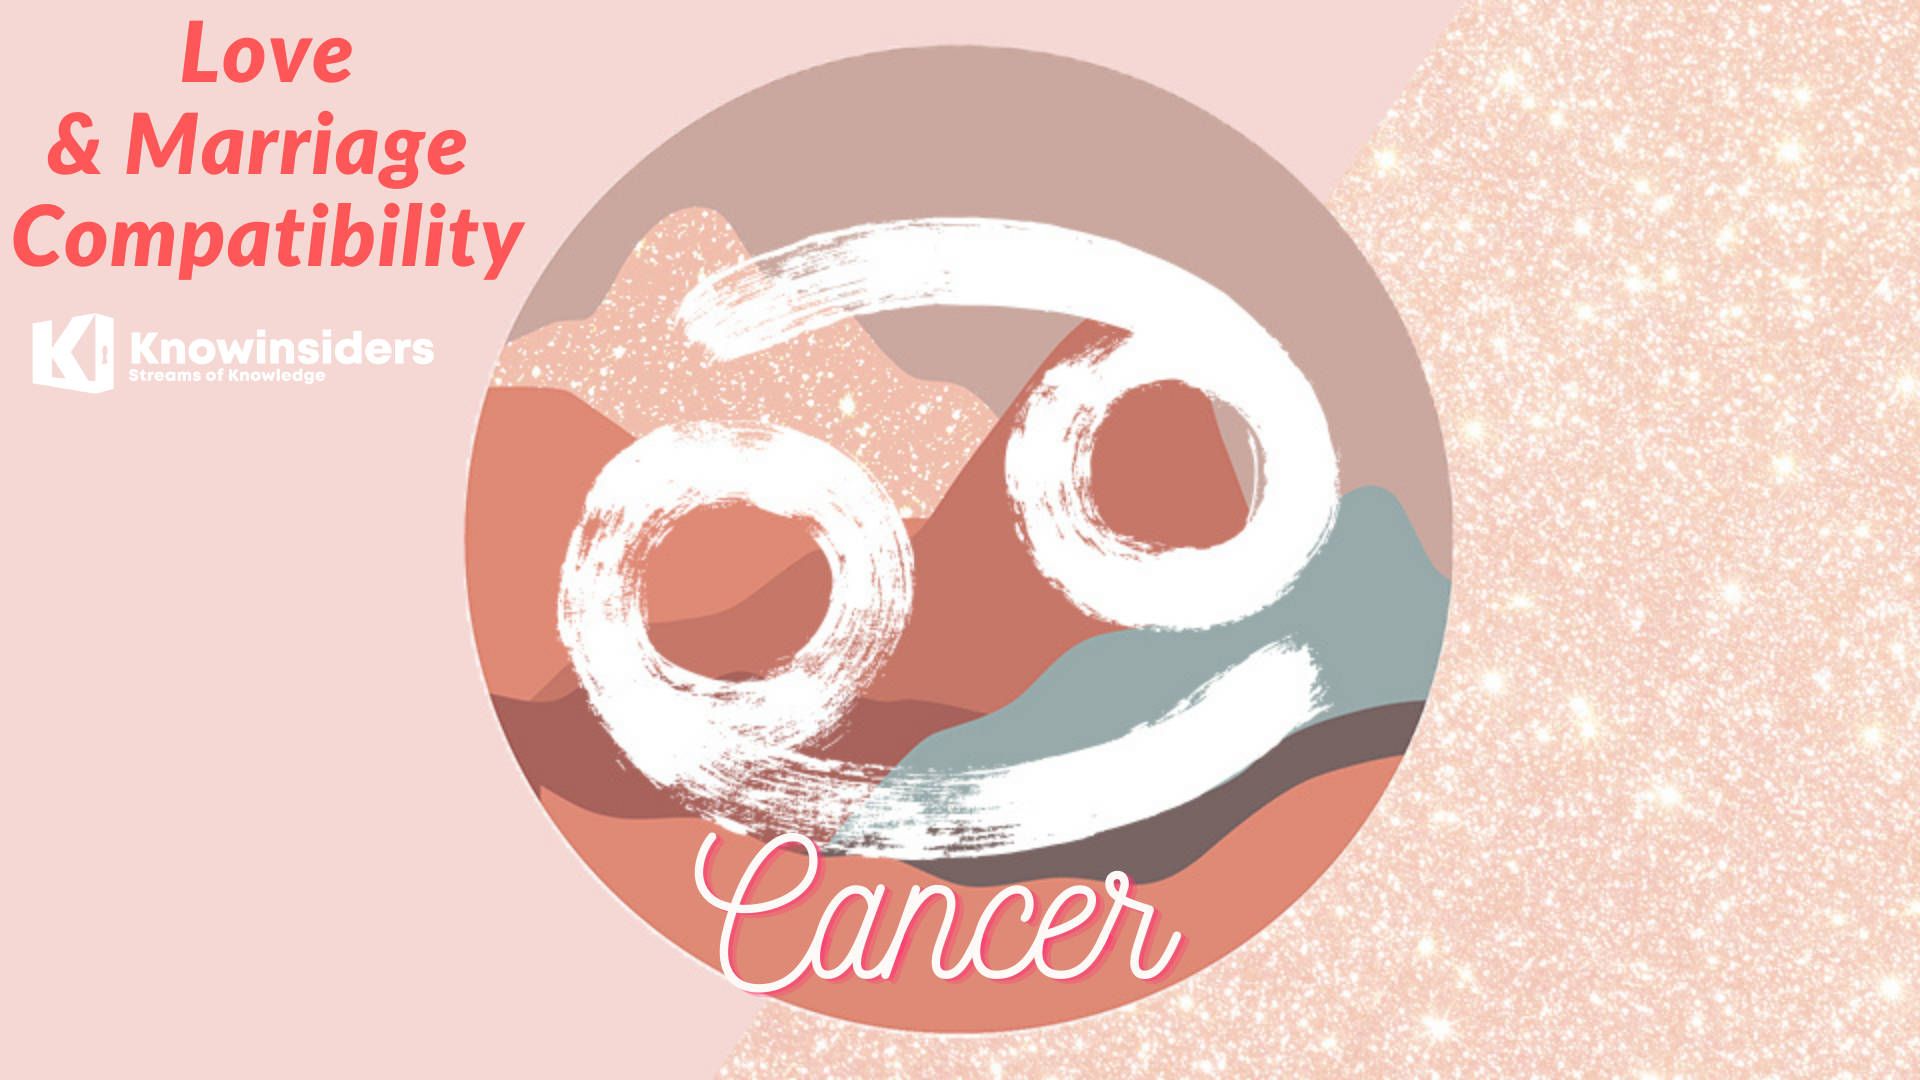 Free Cancer Aesthetic Wallpaper Downloads, Cancer Aesthetic Wallpaper for FREE